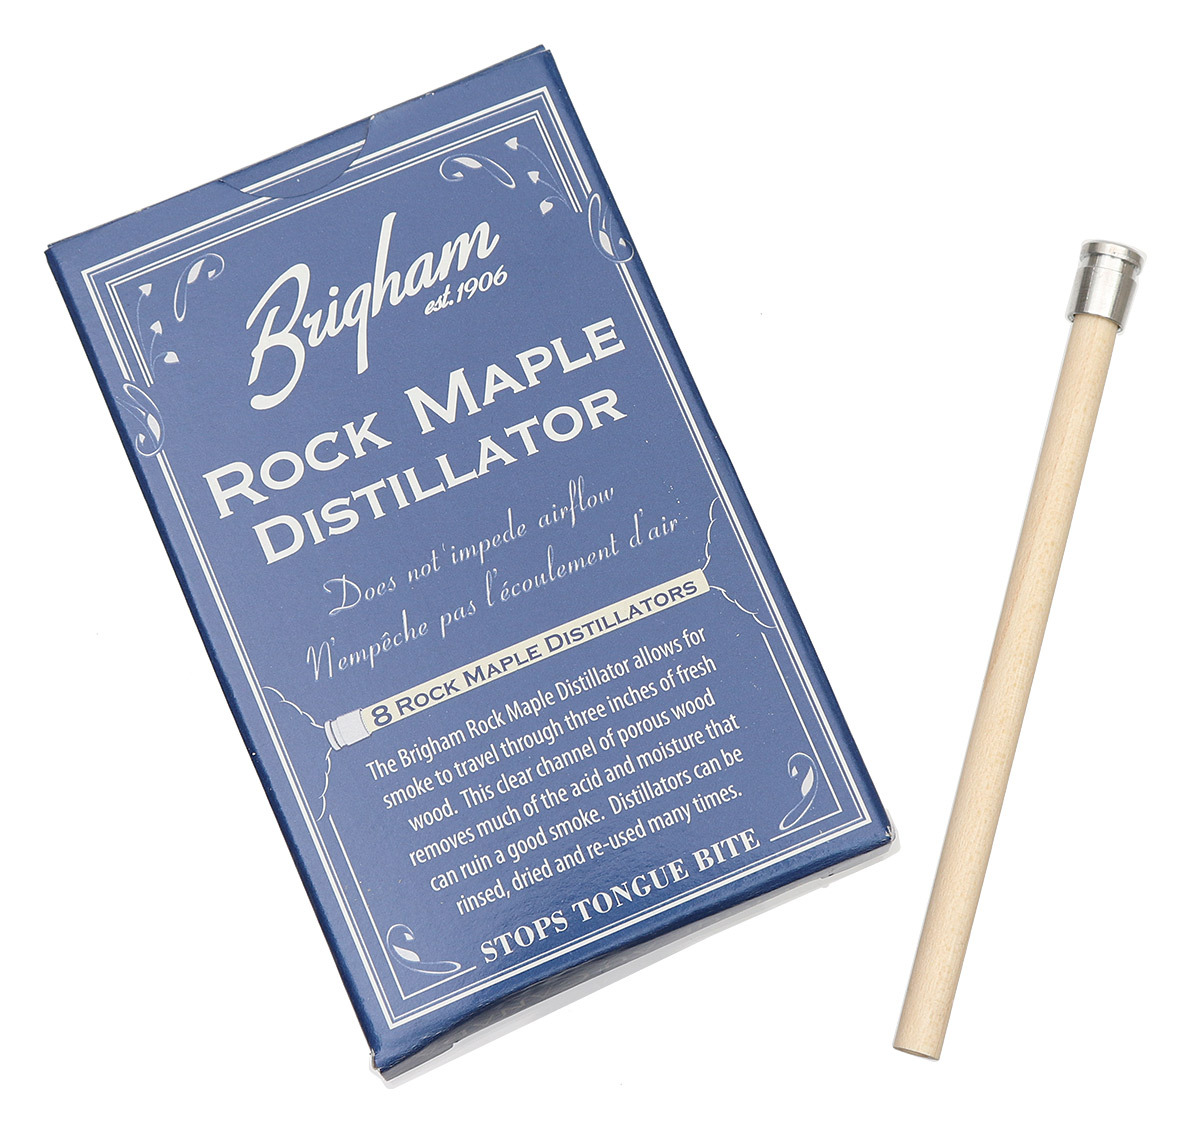 Pipe Tools & Supplies Brigham Rock Maple Insert (8 Pack)